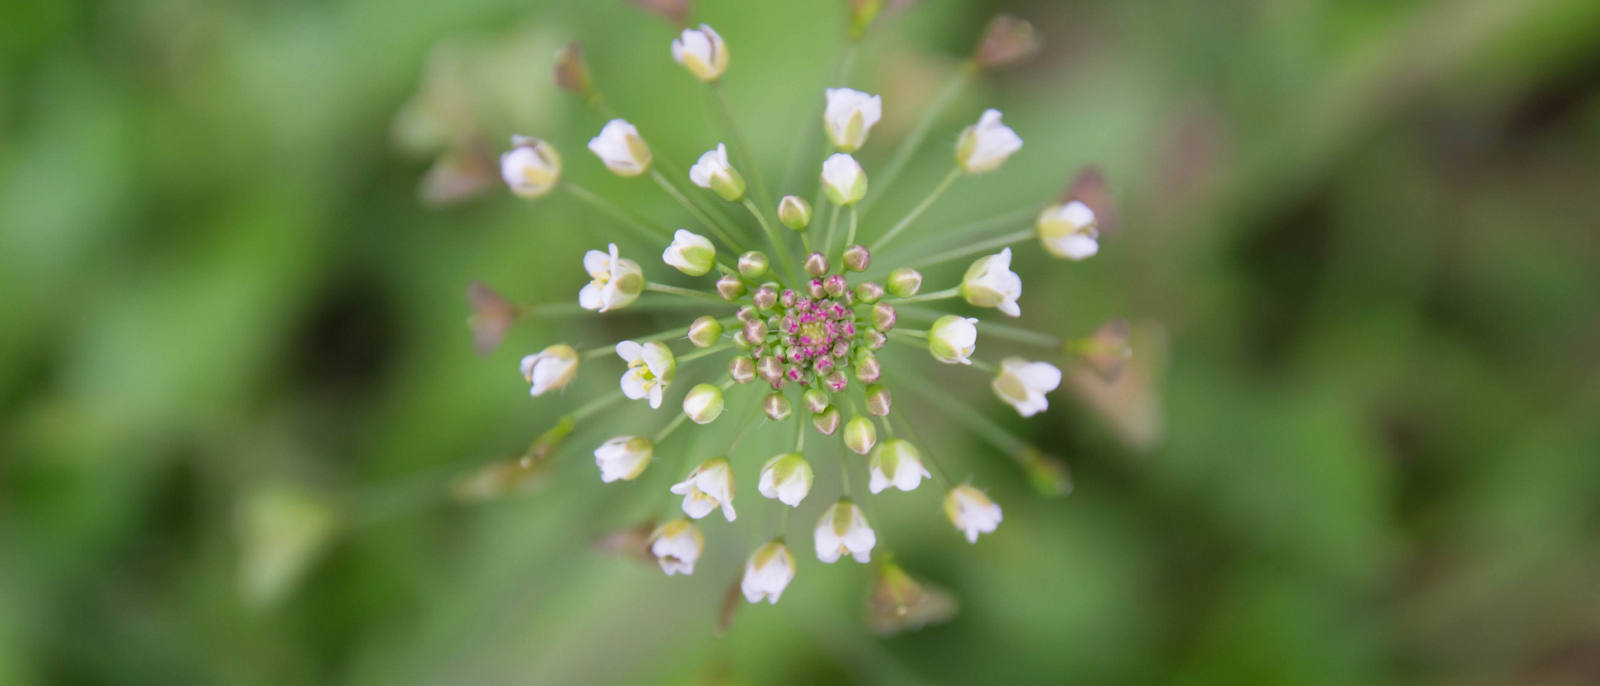 Edible wild plants: native herbs and their effects